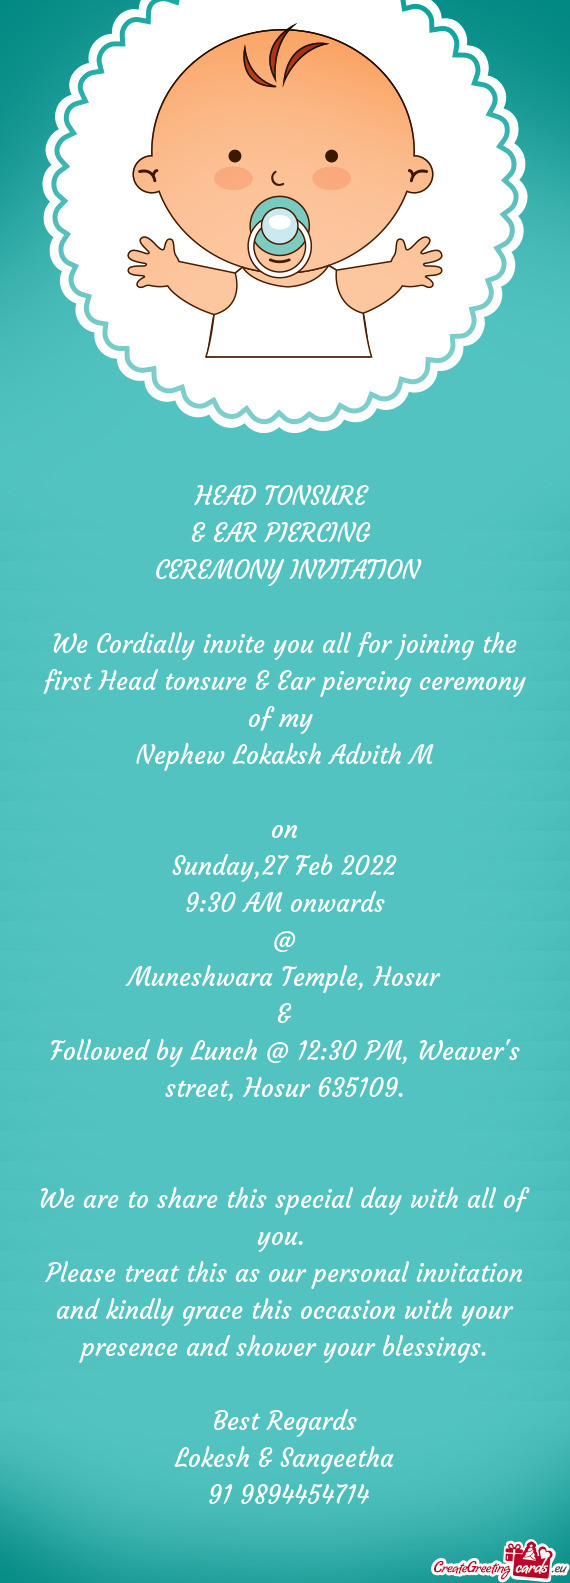 We Cordially invite you all for joining the first Head tonsure & Ear piercing ceremony of my